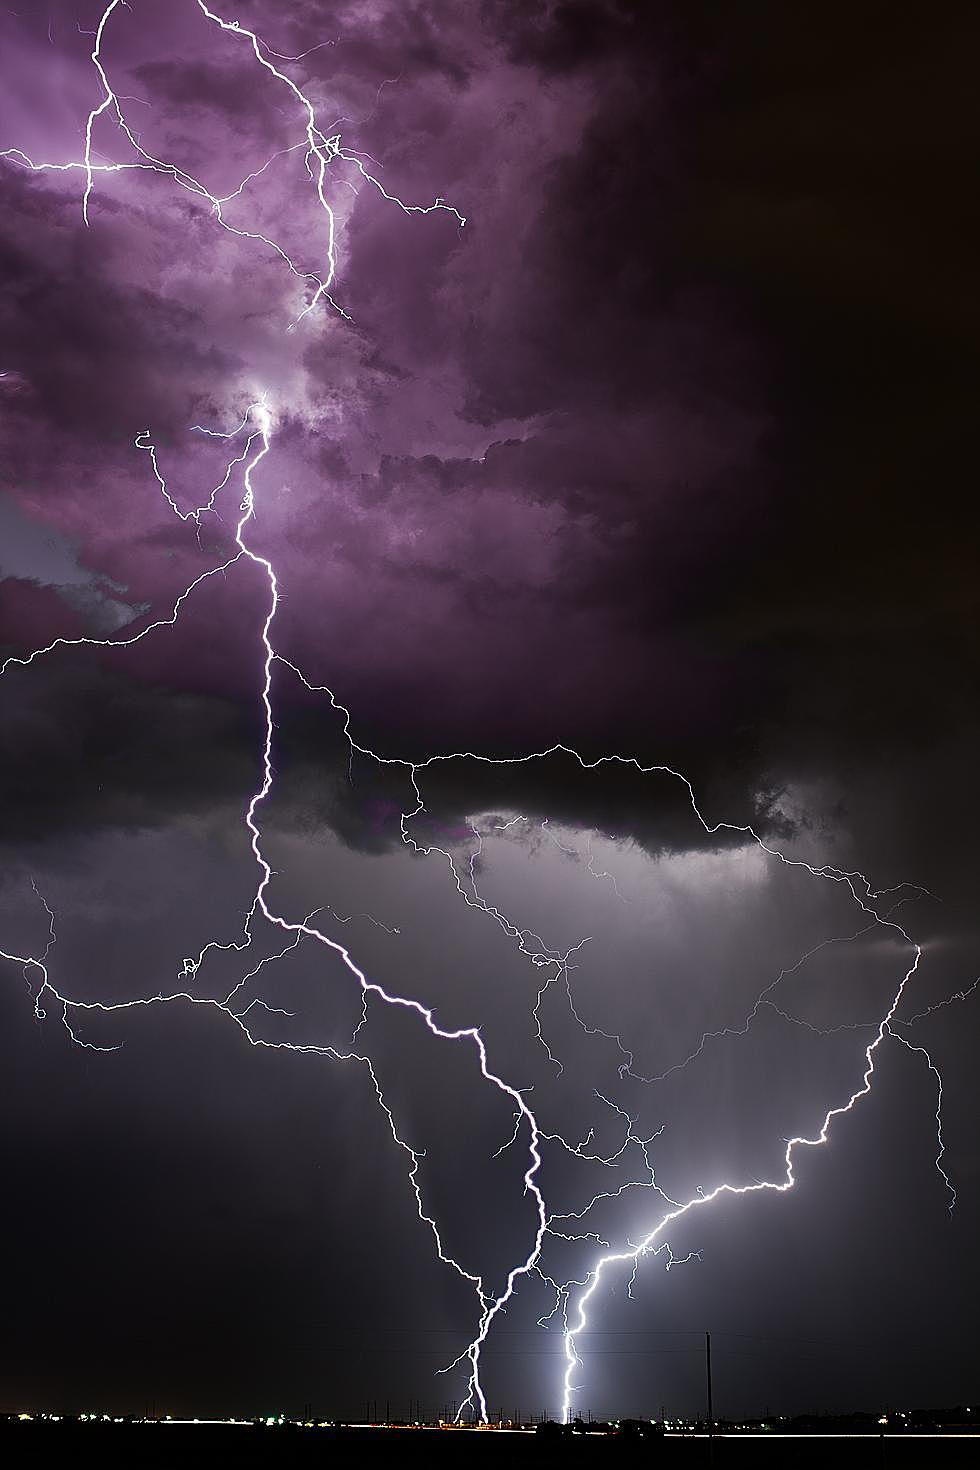 Alabama Woman Struck by Lightning While Still in Her House